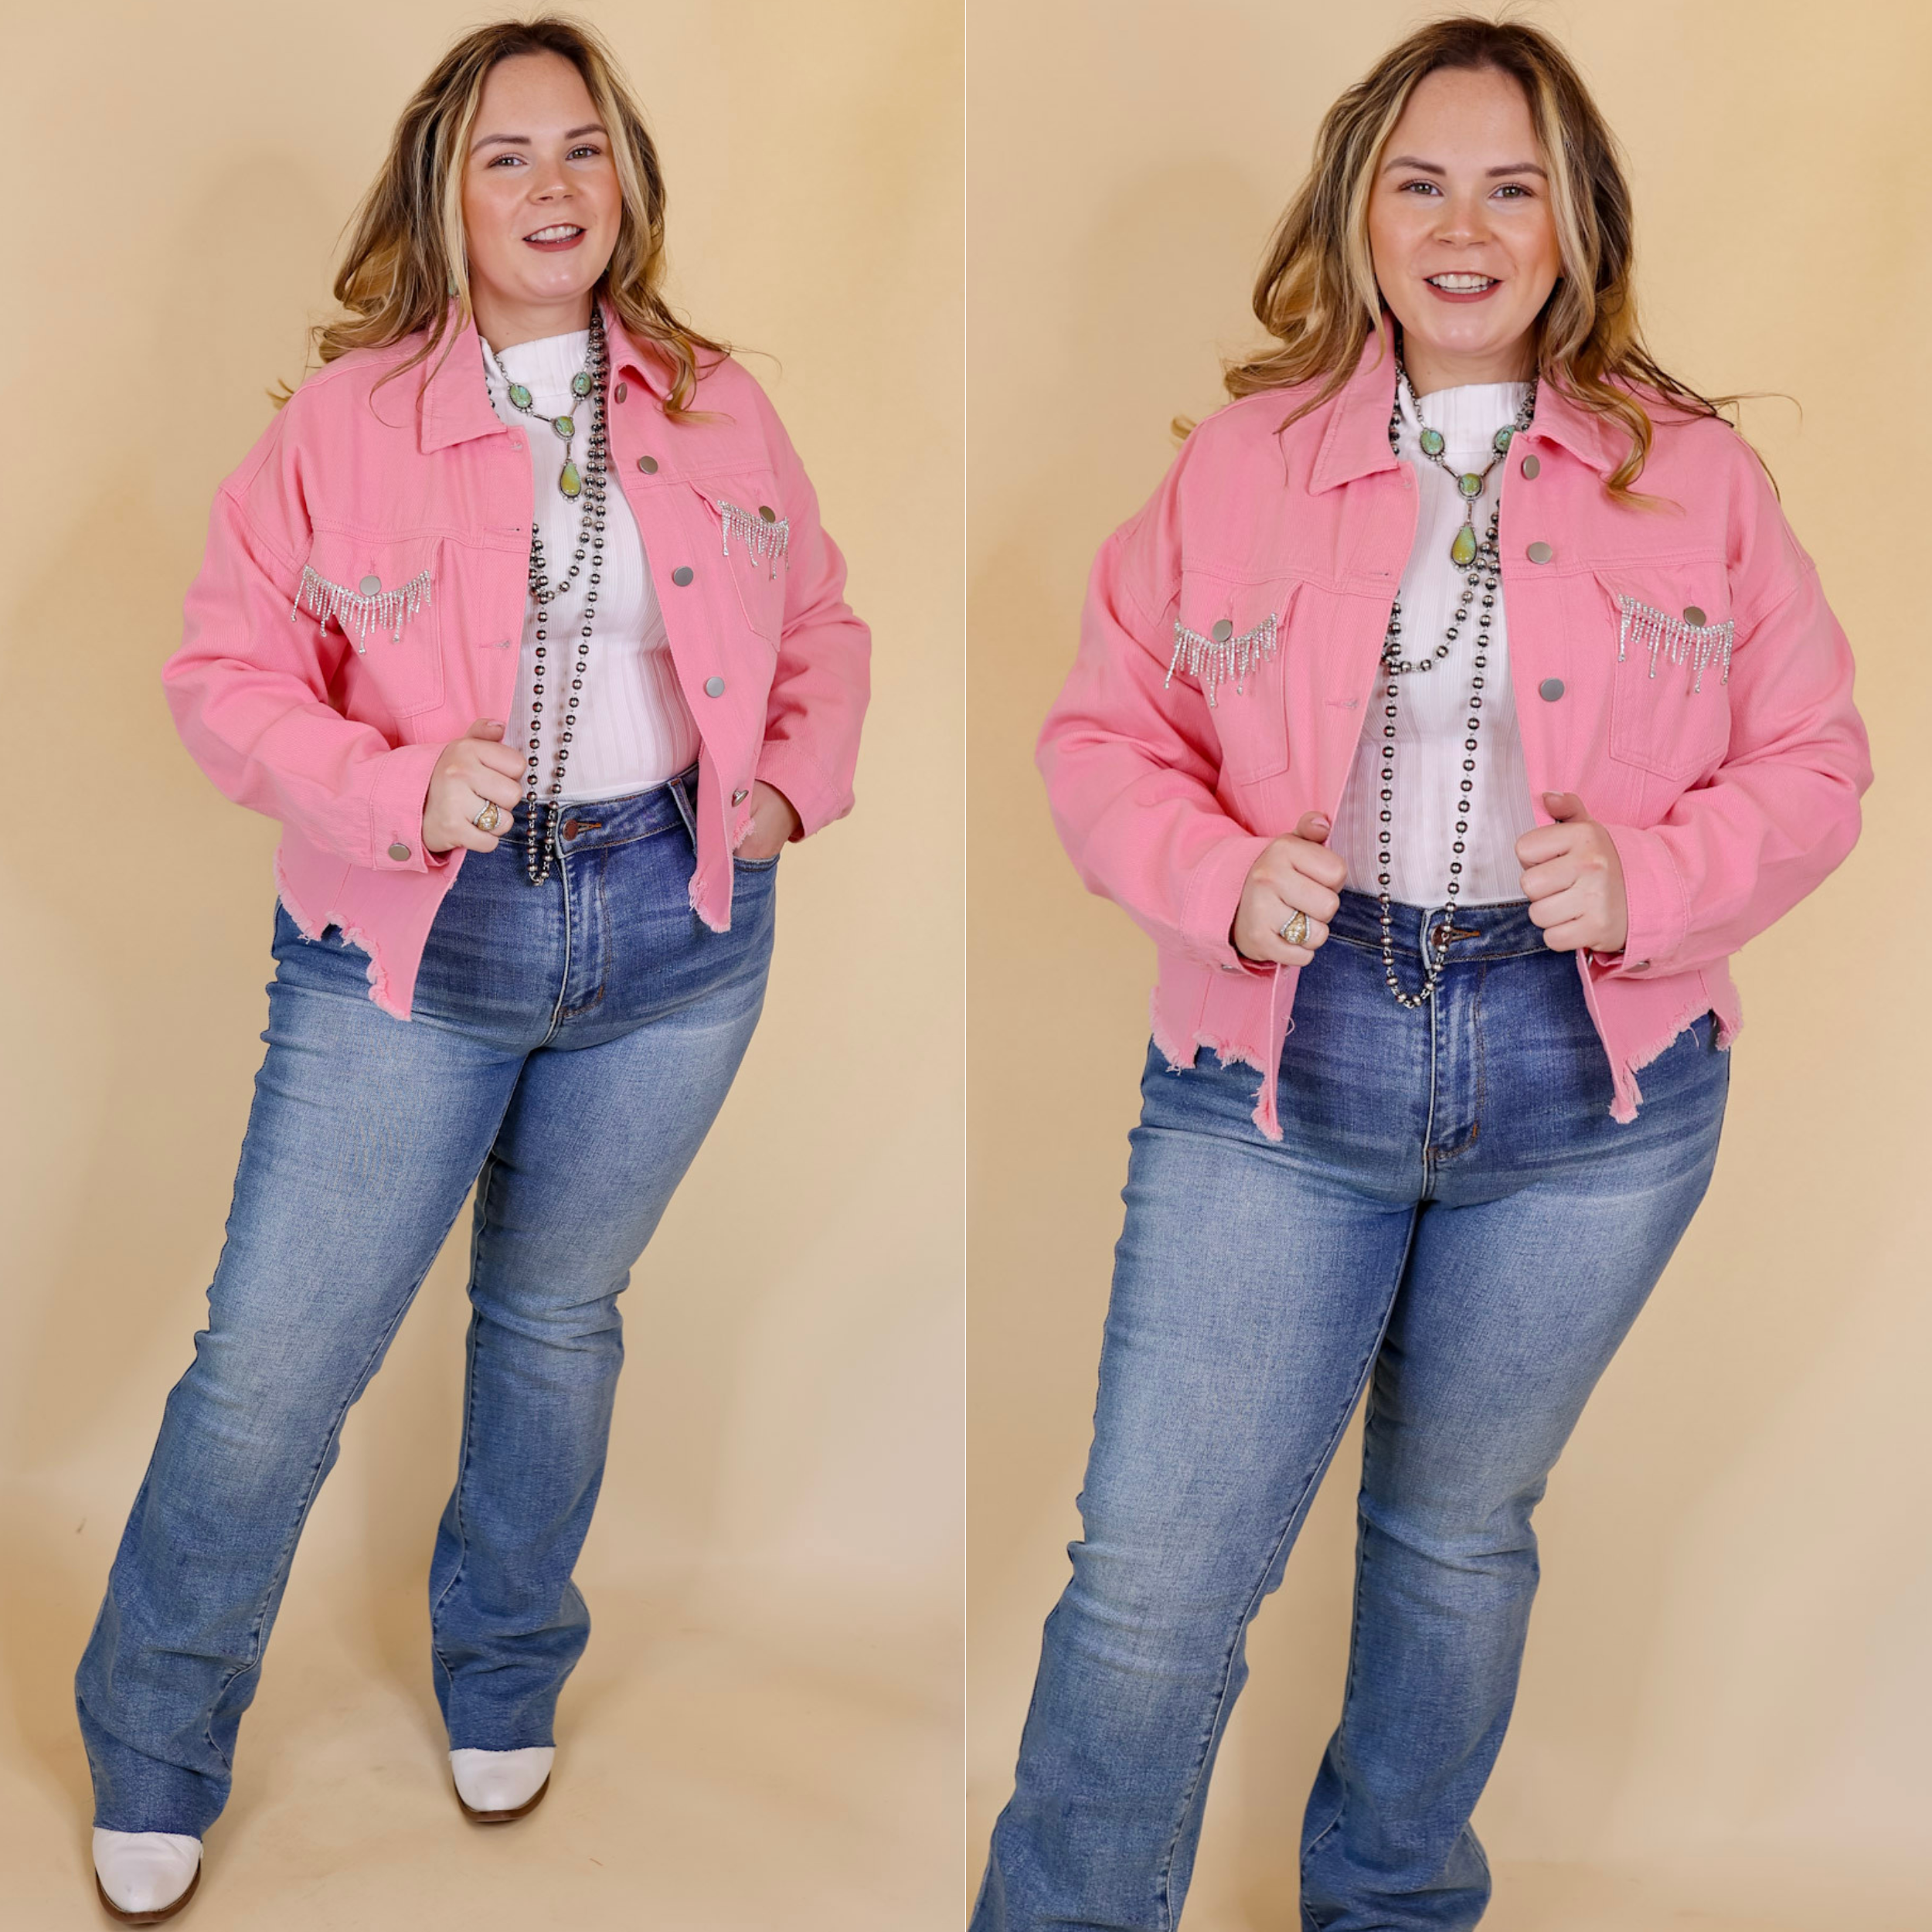 Model is wearing a denim jacket with crystal fringe around the pocket, in light pink. Model has this jacket paired with a white top, jeans, white booties, and silver jewelry. The background is solid tan. 